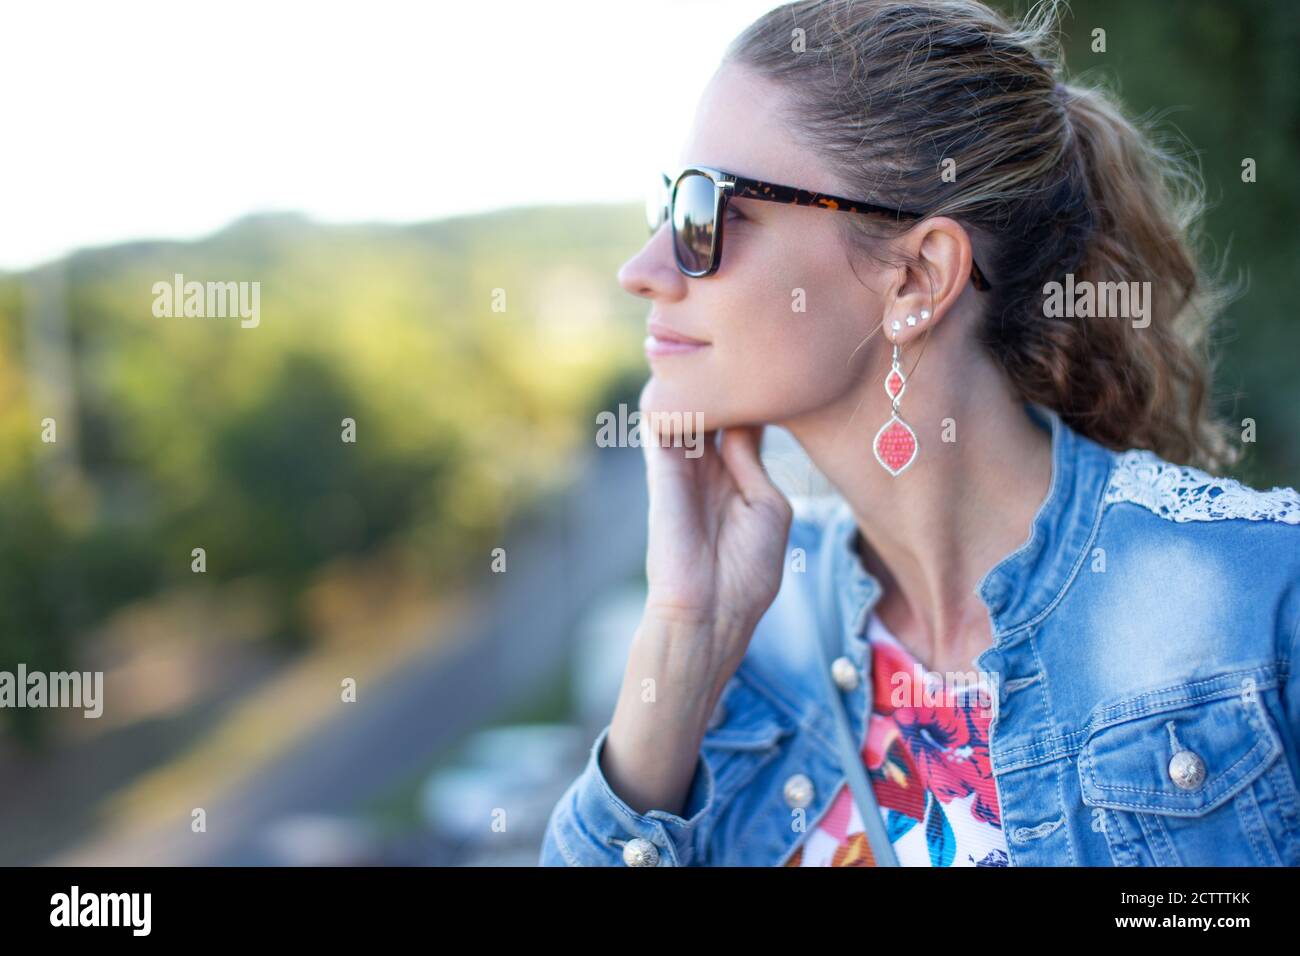 30s Caucasian woman profile view portrait in park looking into distance Stock Photo